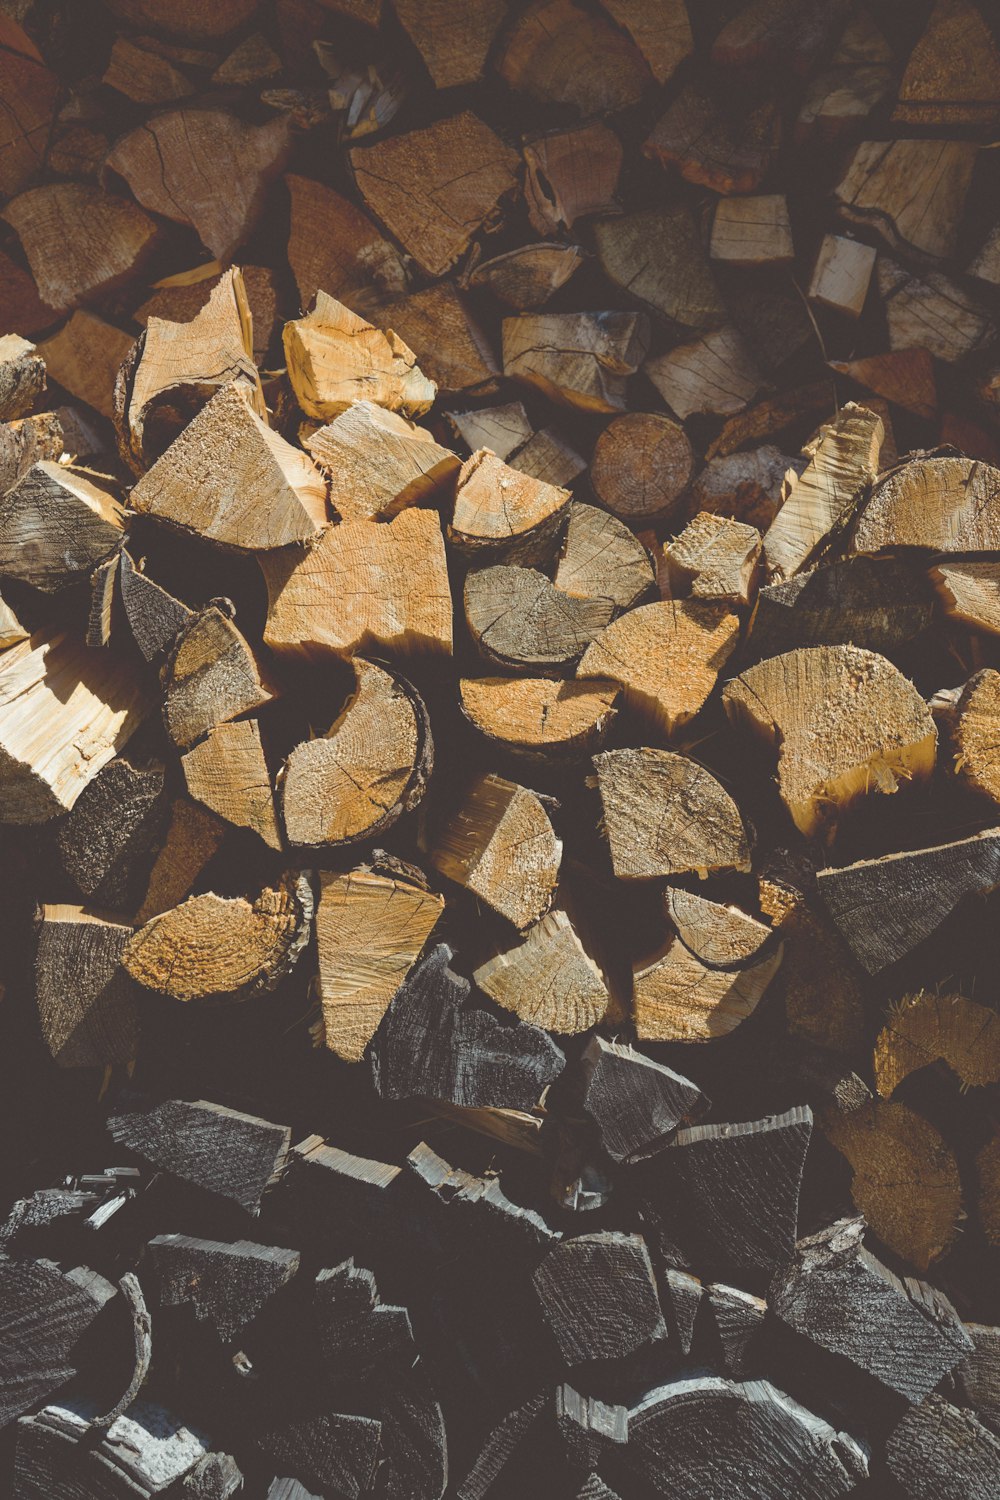 brown and black firewood lot